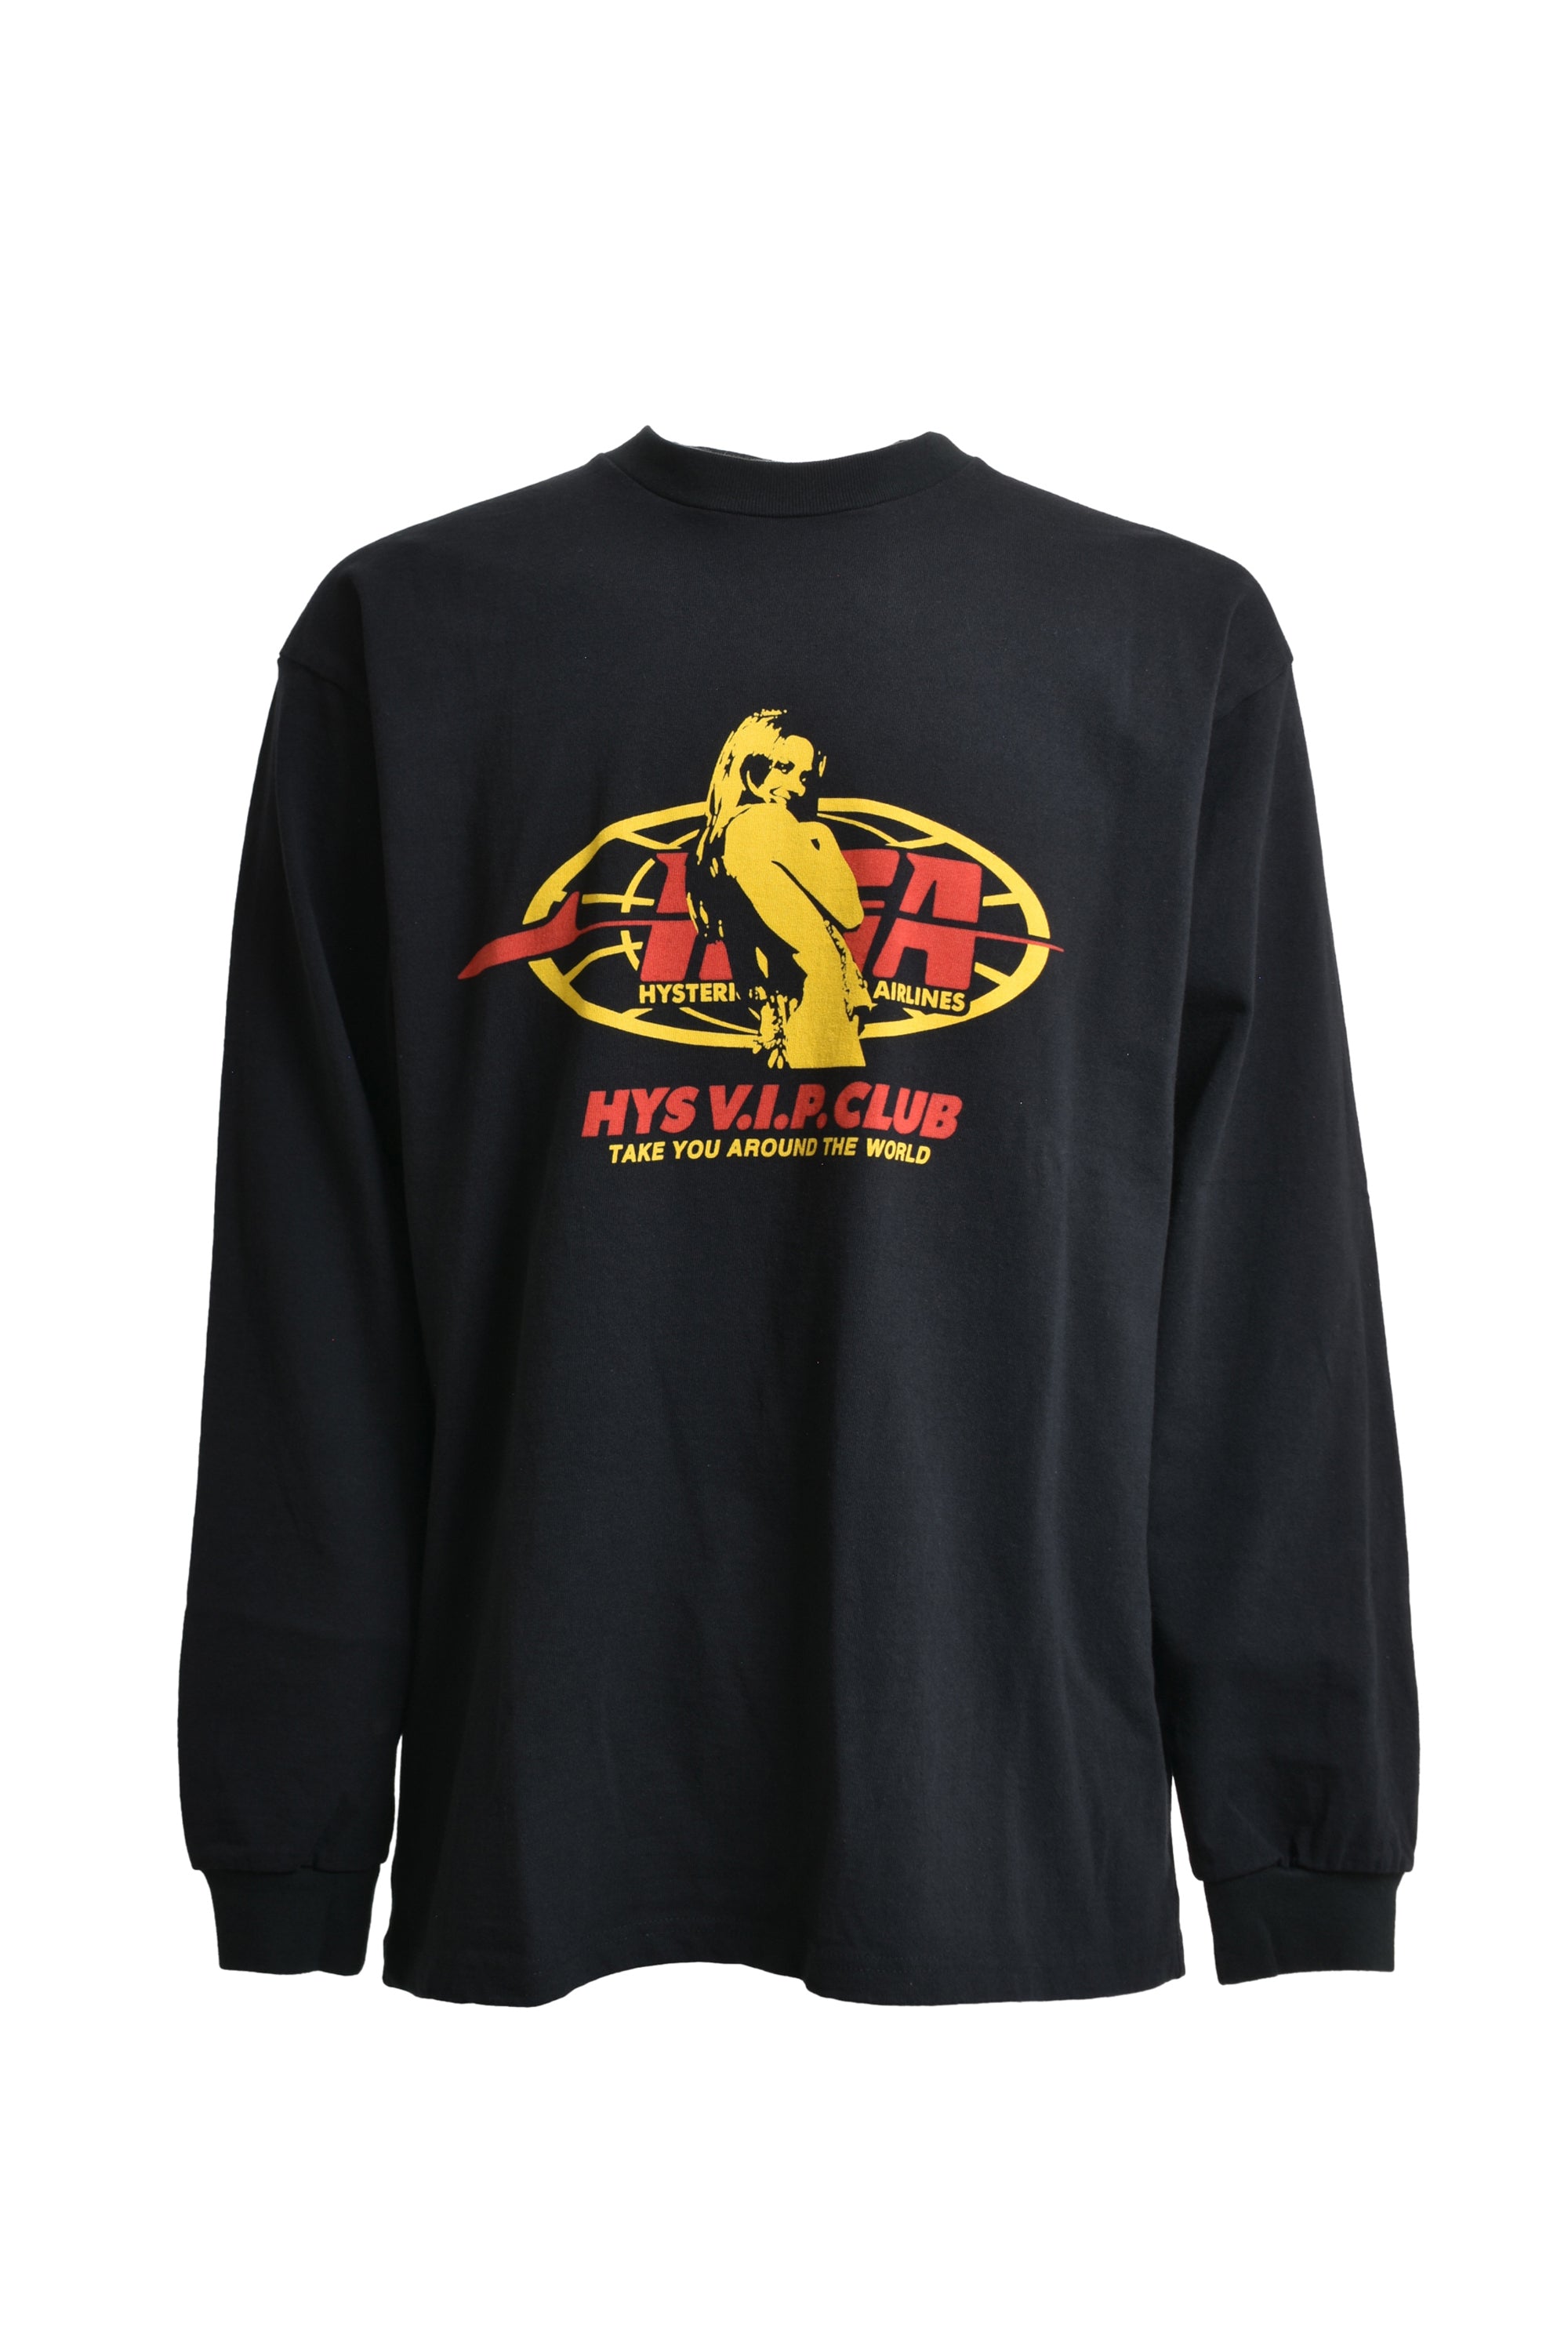 HYSTERIC GLAMOUR ヒステリックグラマー FW23 HYSTERIC AIRLINE LS T ...